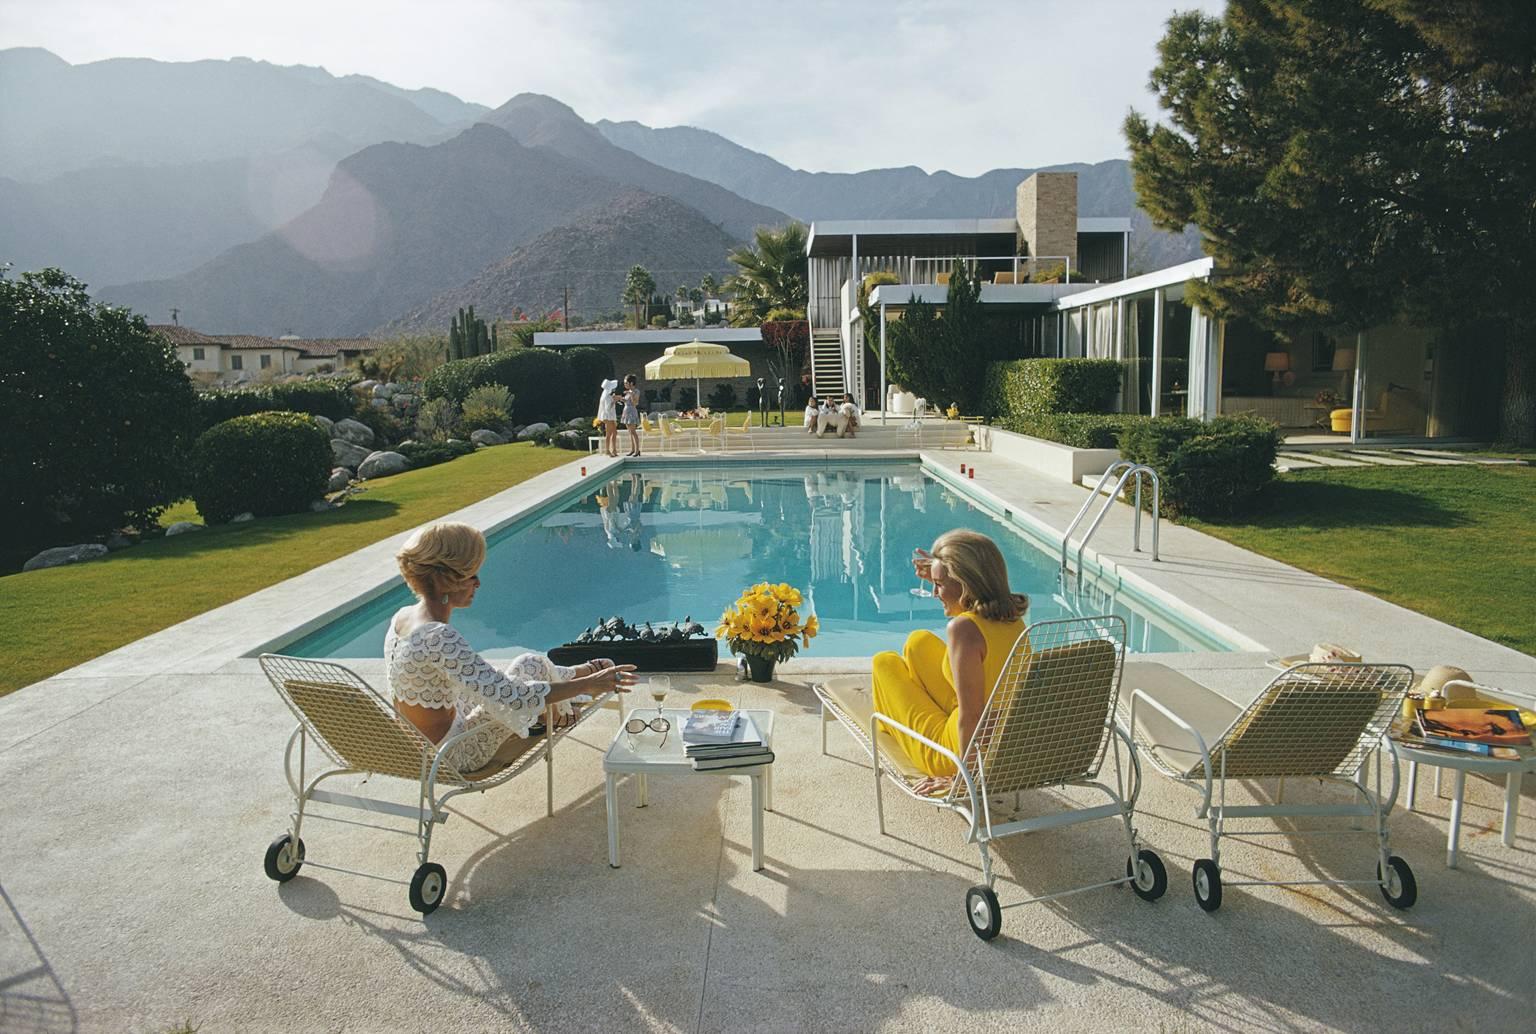 'Kaufmann Desert House' by Slim Aarons

Set to become another true Slim Aarons Classic - it's better known cousins 'Poolside Gossip'  and 'Desert House Party' (also listed) are considered to be true modern masterpieces of photography - and this new